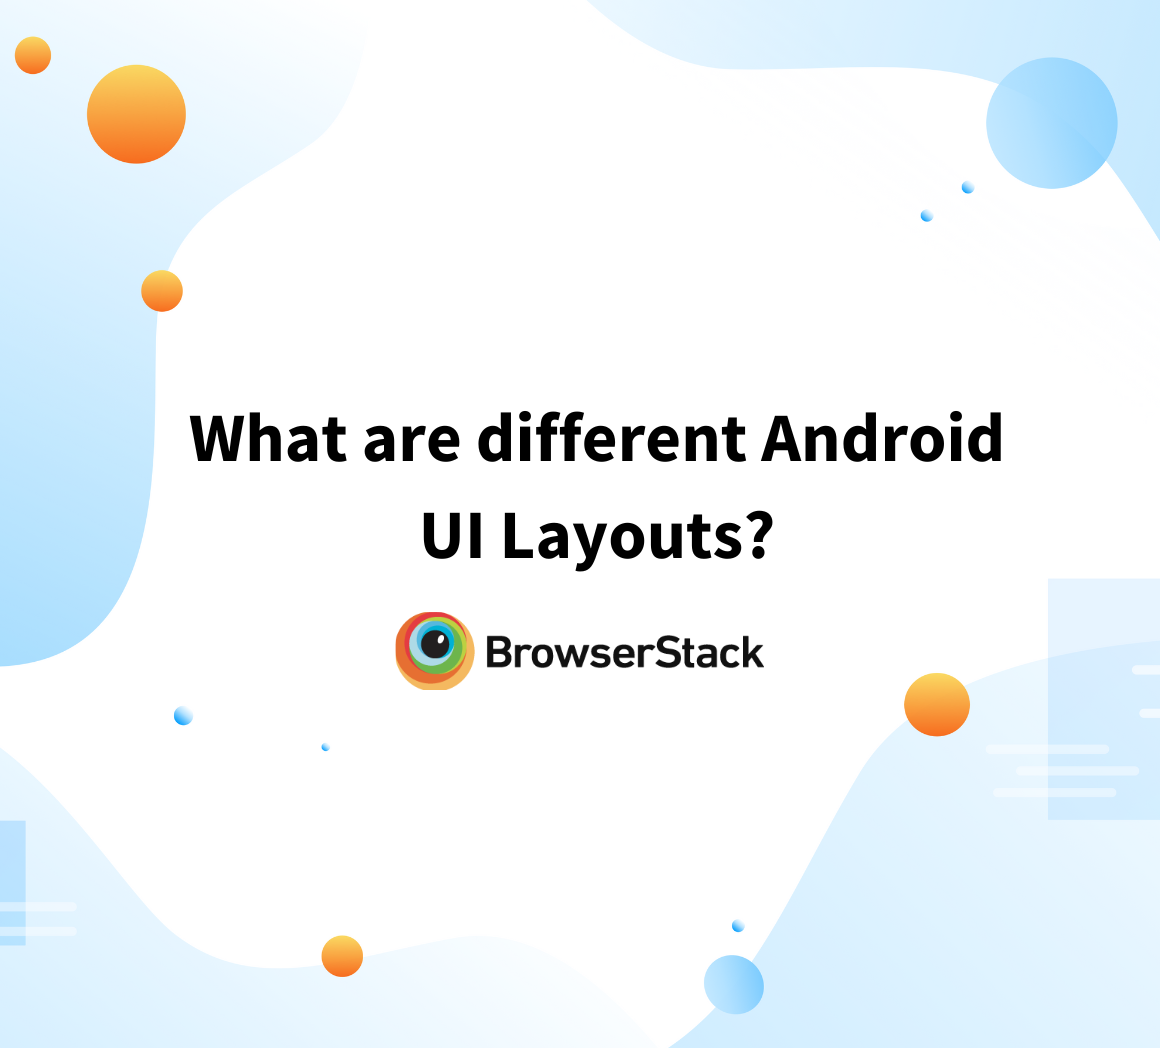 What are different Android UI Layouts